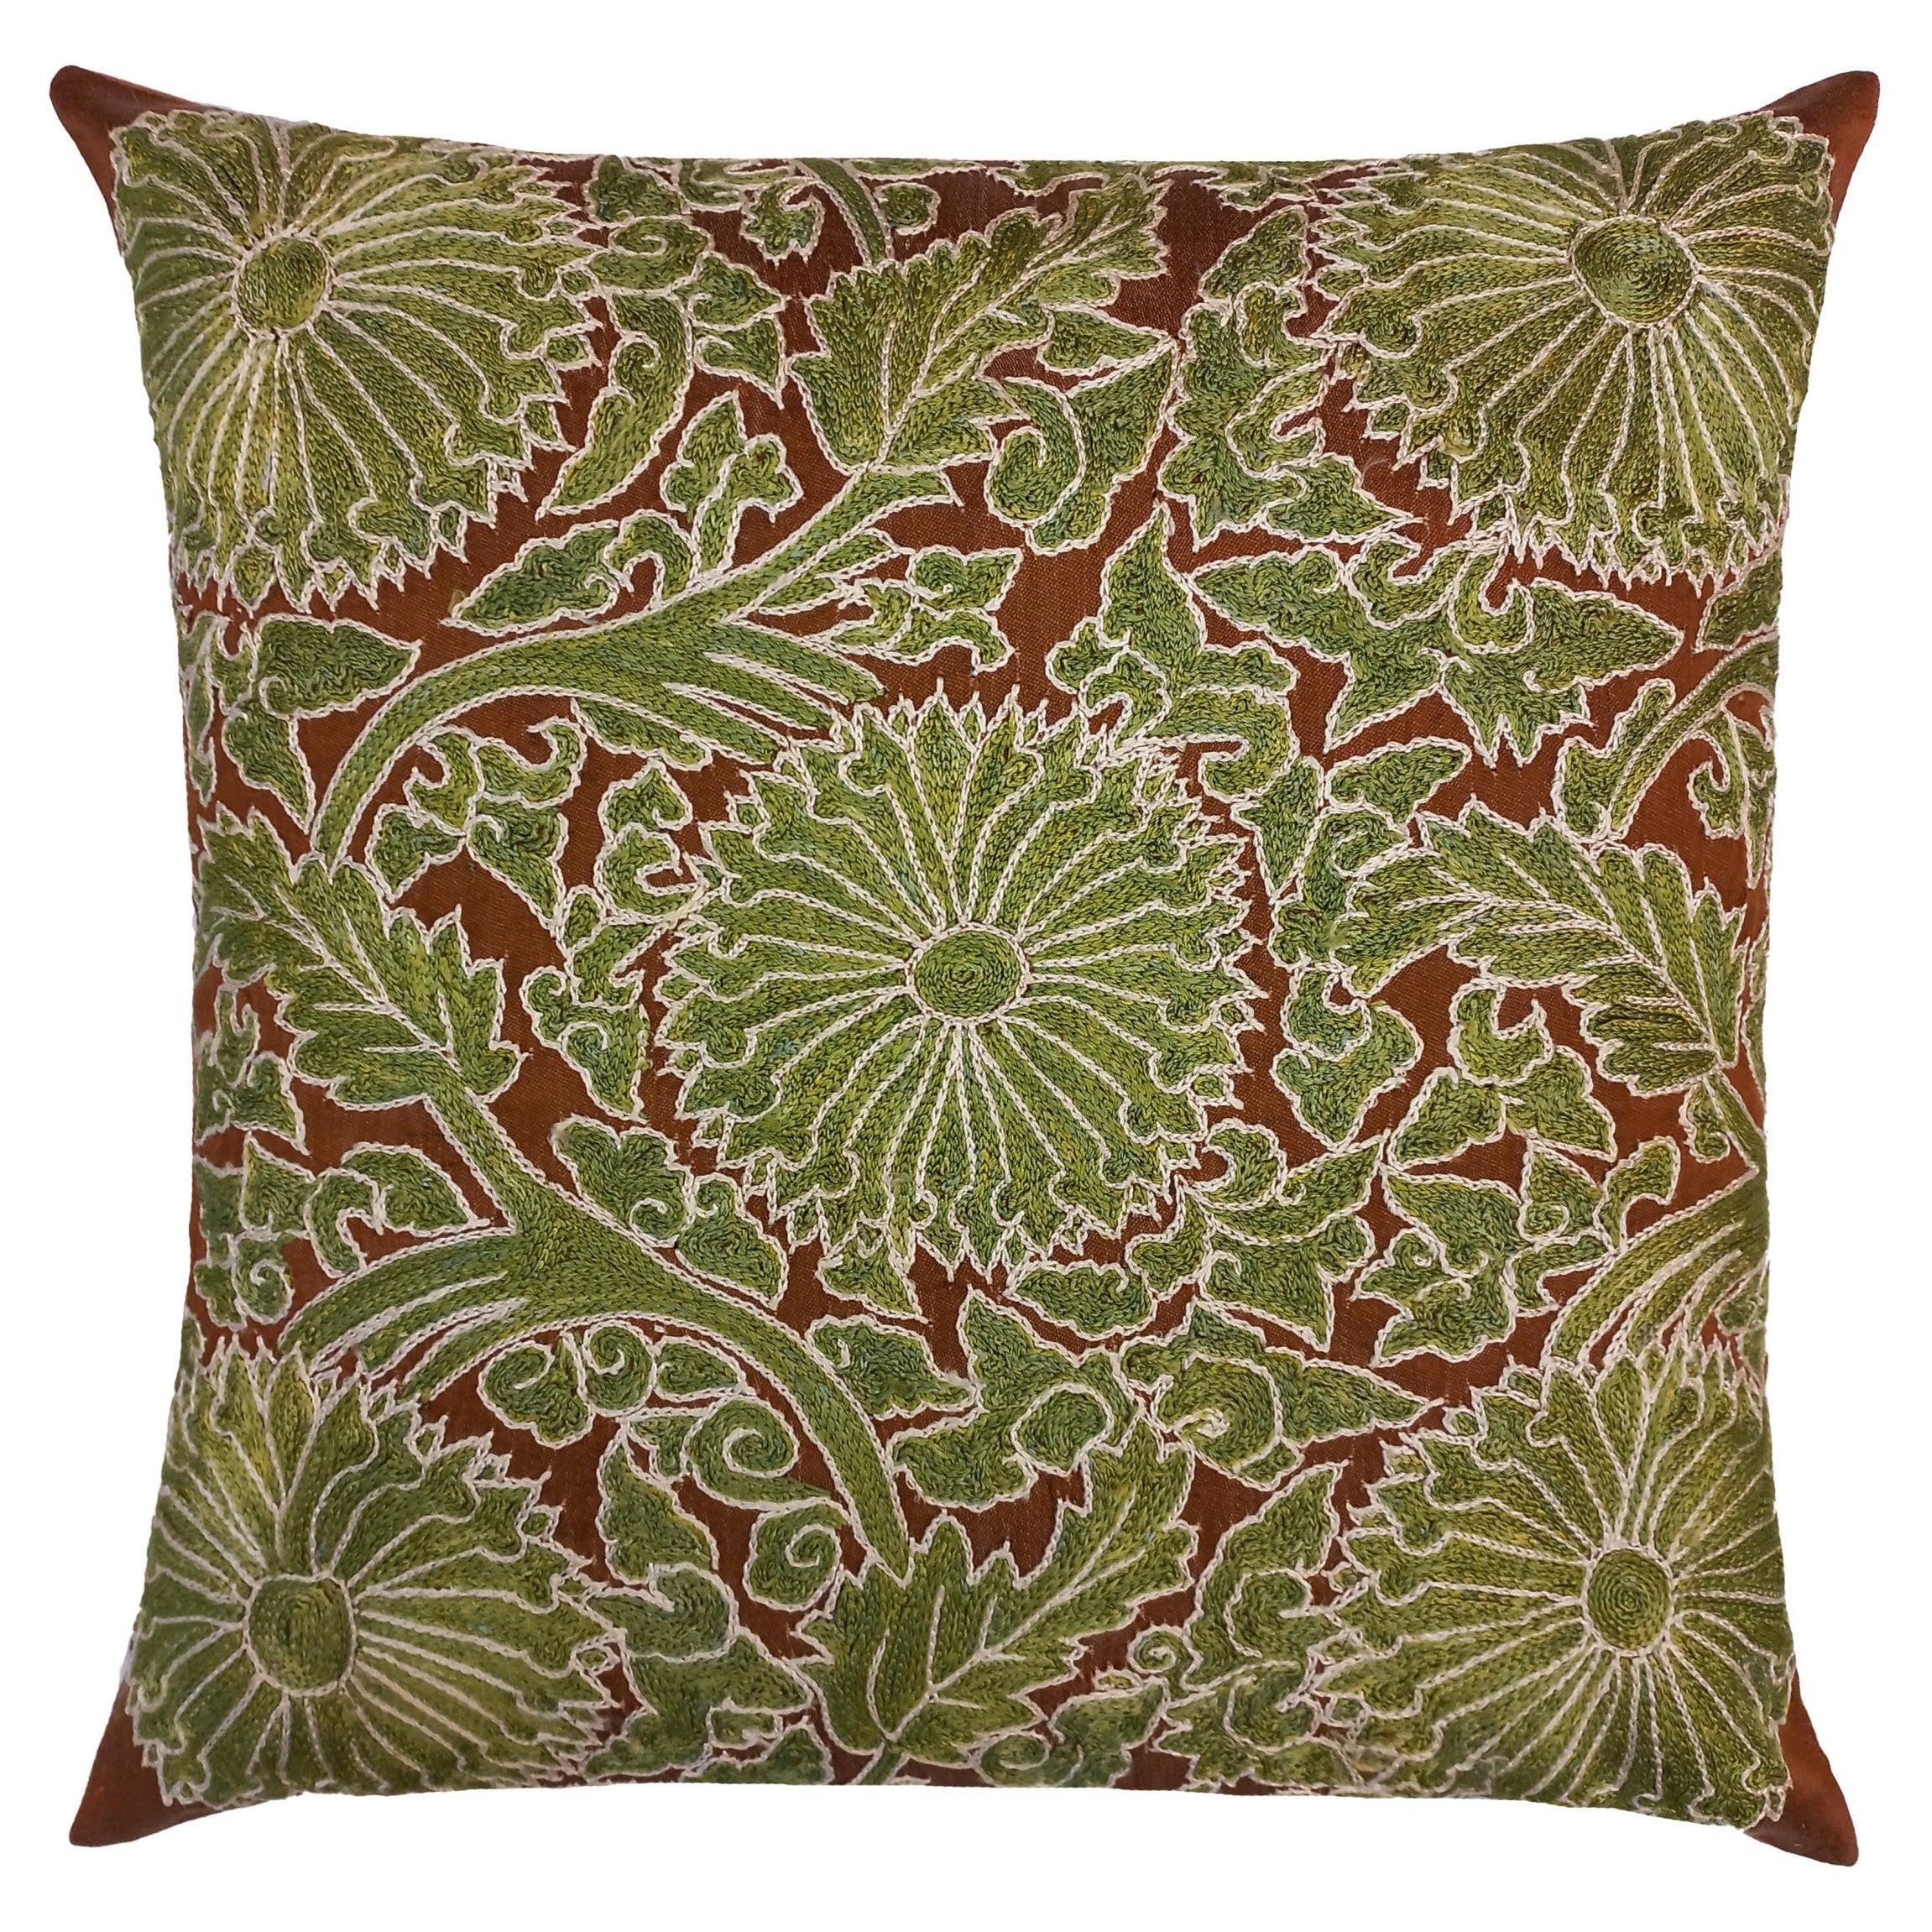 19"x19" Uzbek Suzani Cushion Cover Made of Silk, Hand Embroidered Brown & Green